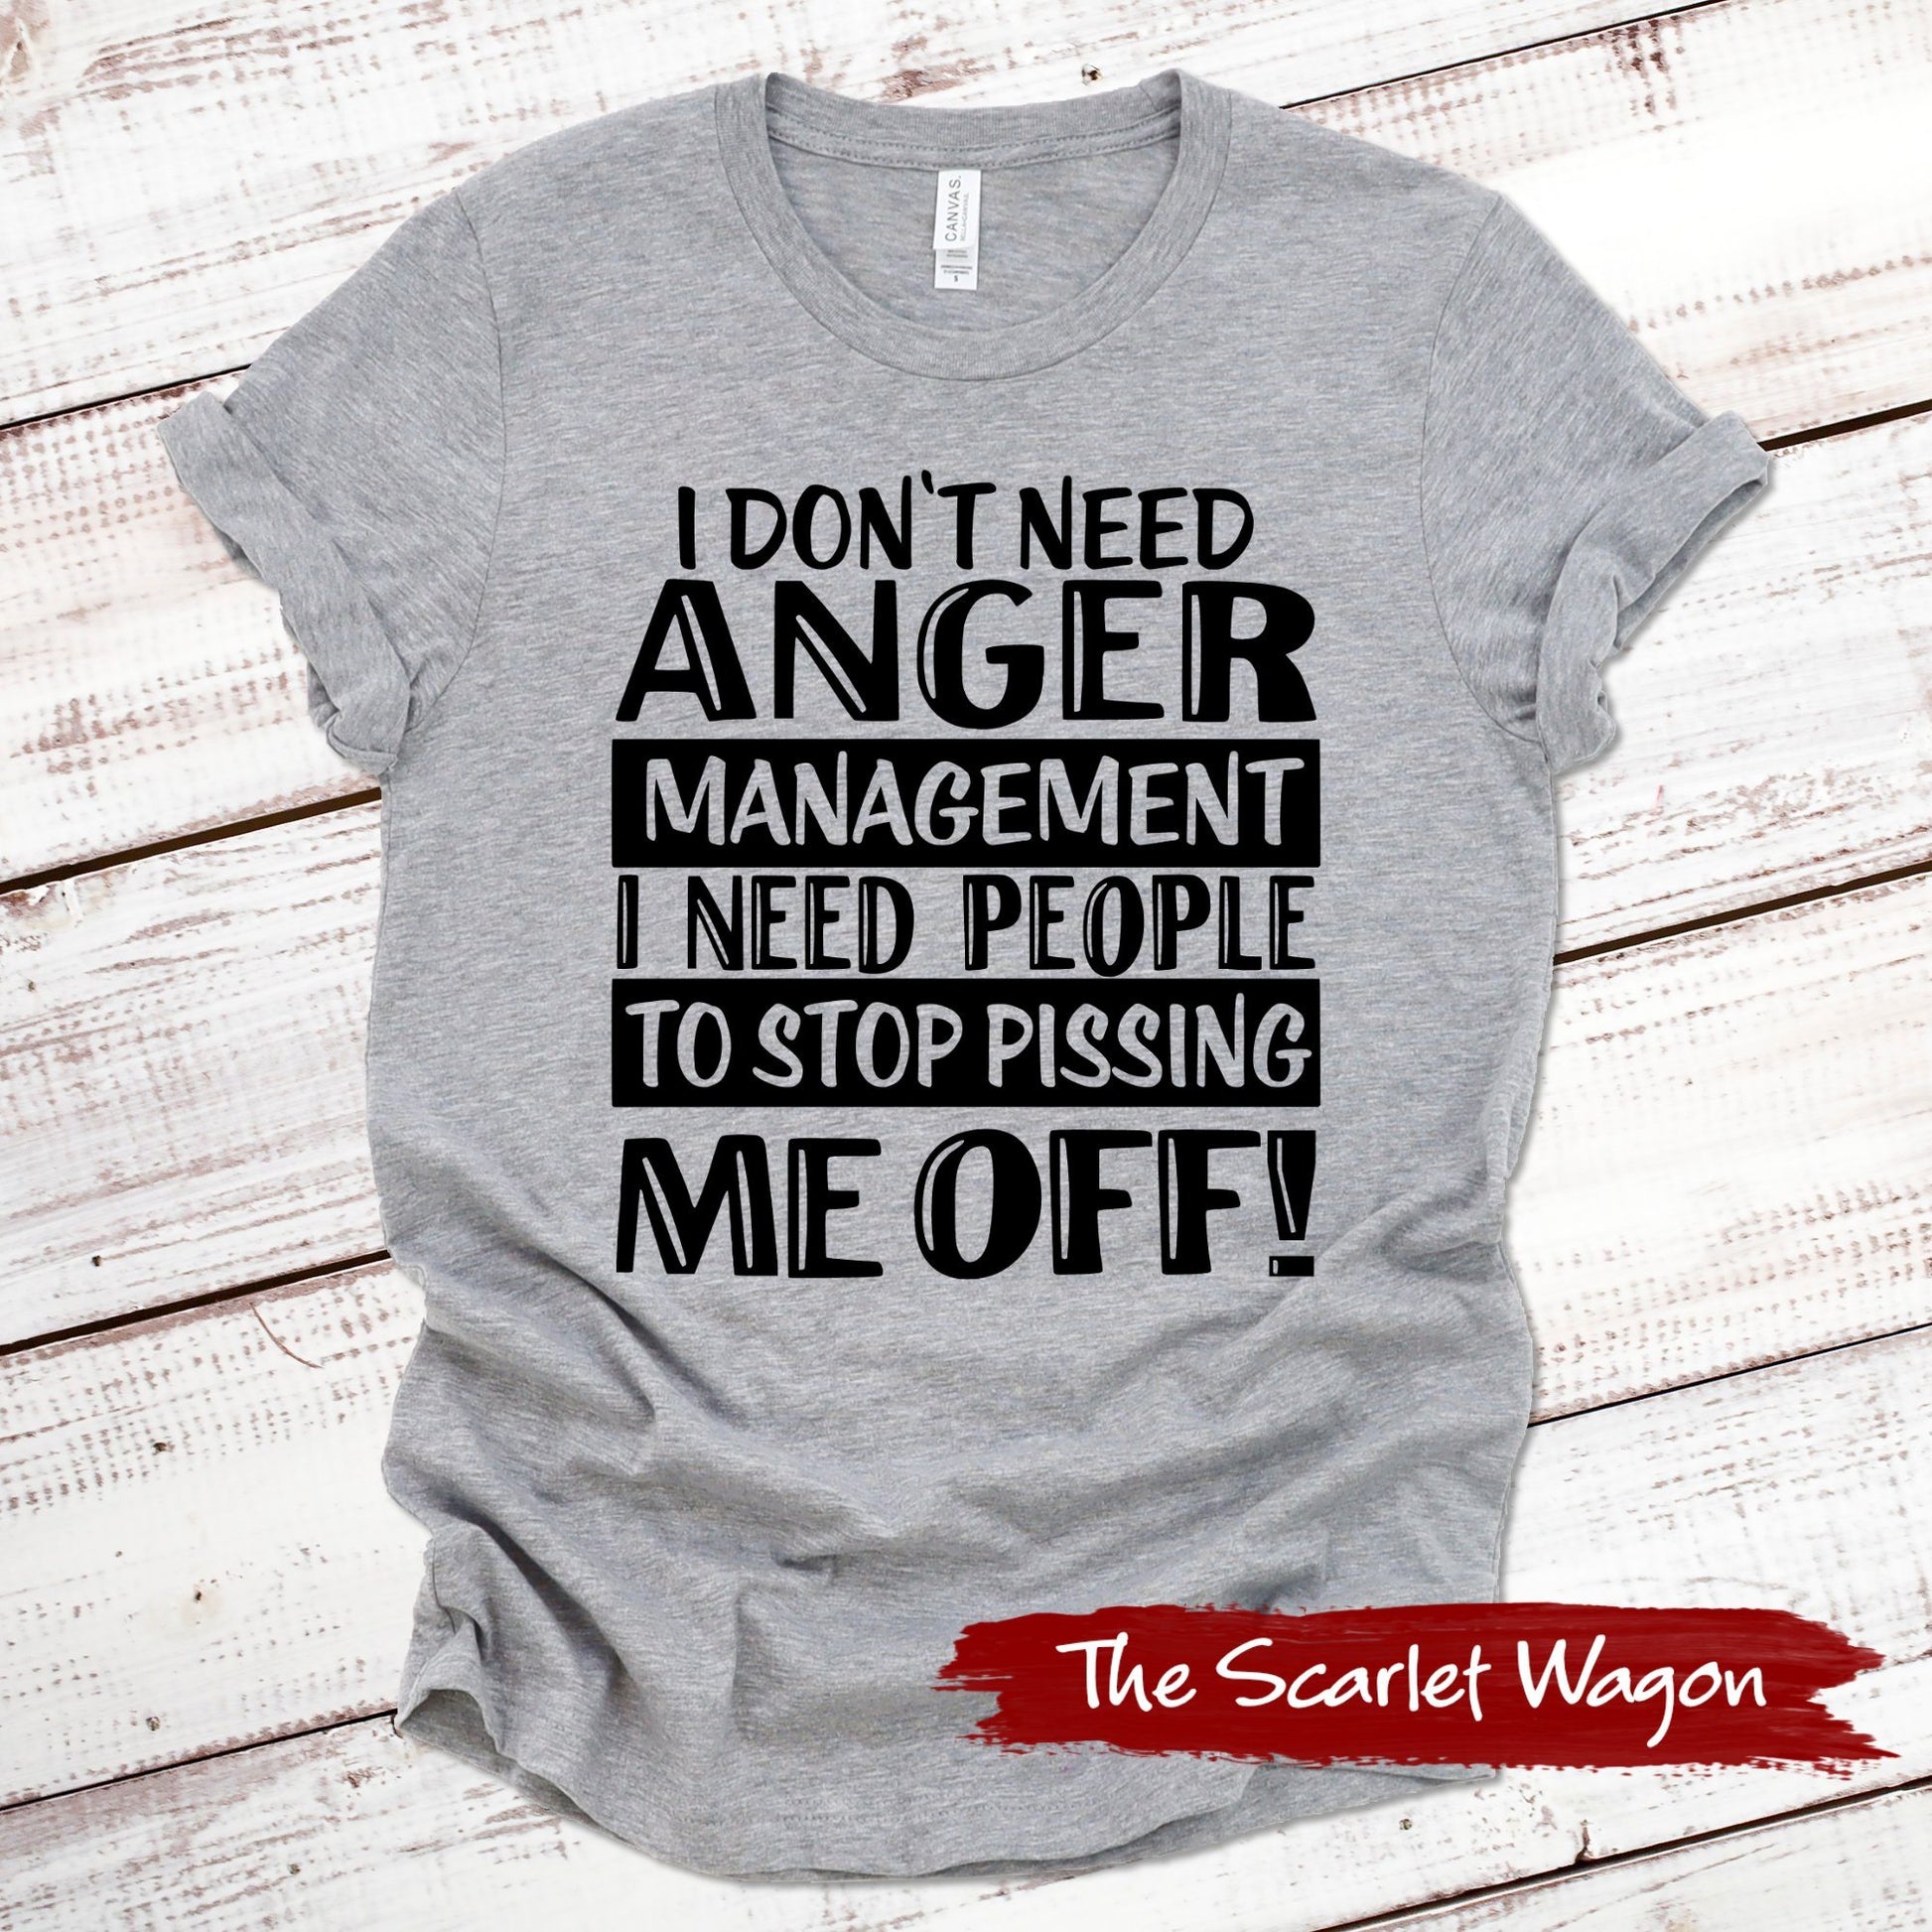 I Don't Need Anger Management Funny Shirt Scarlet Wagon Athletic Heather XS 